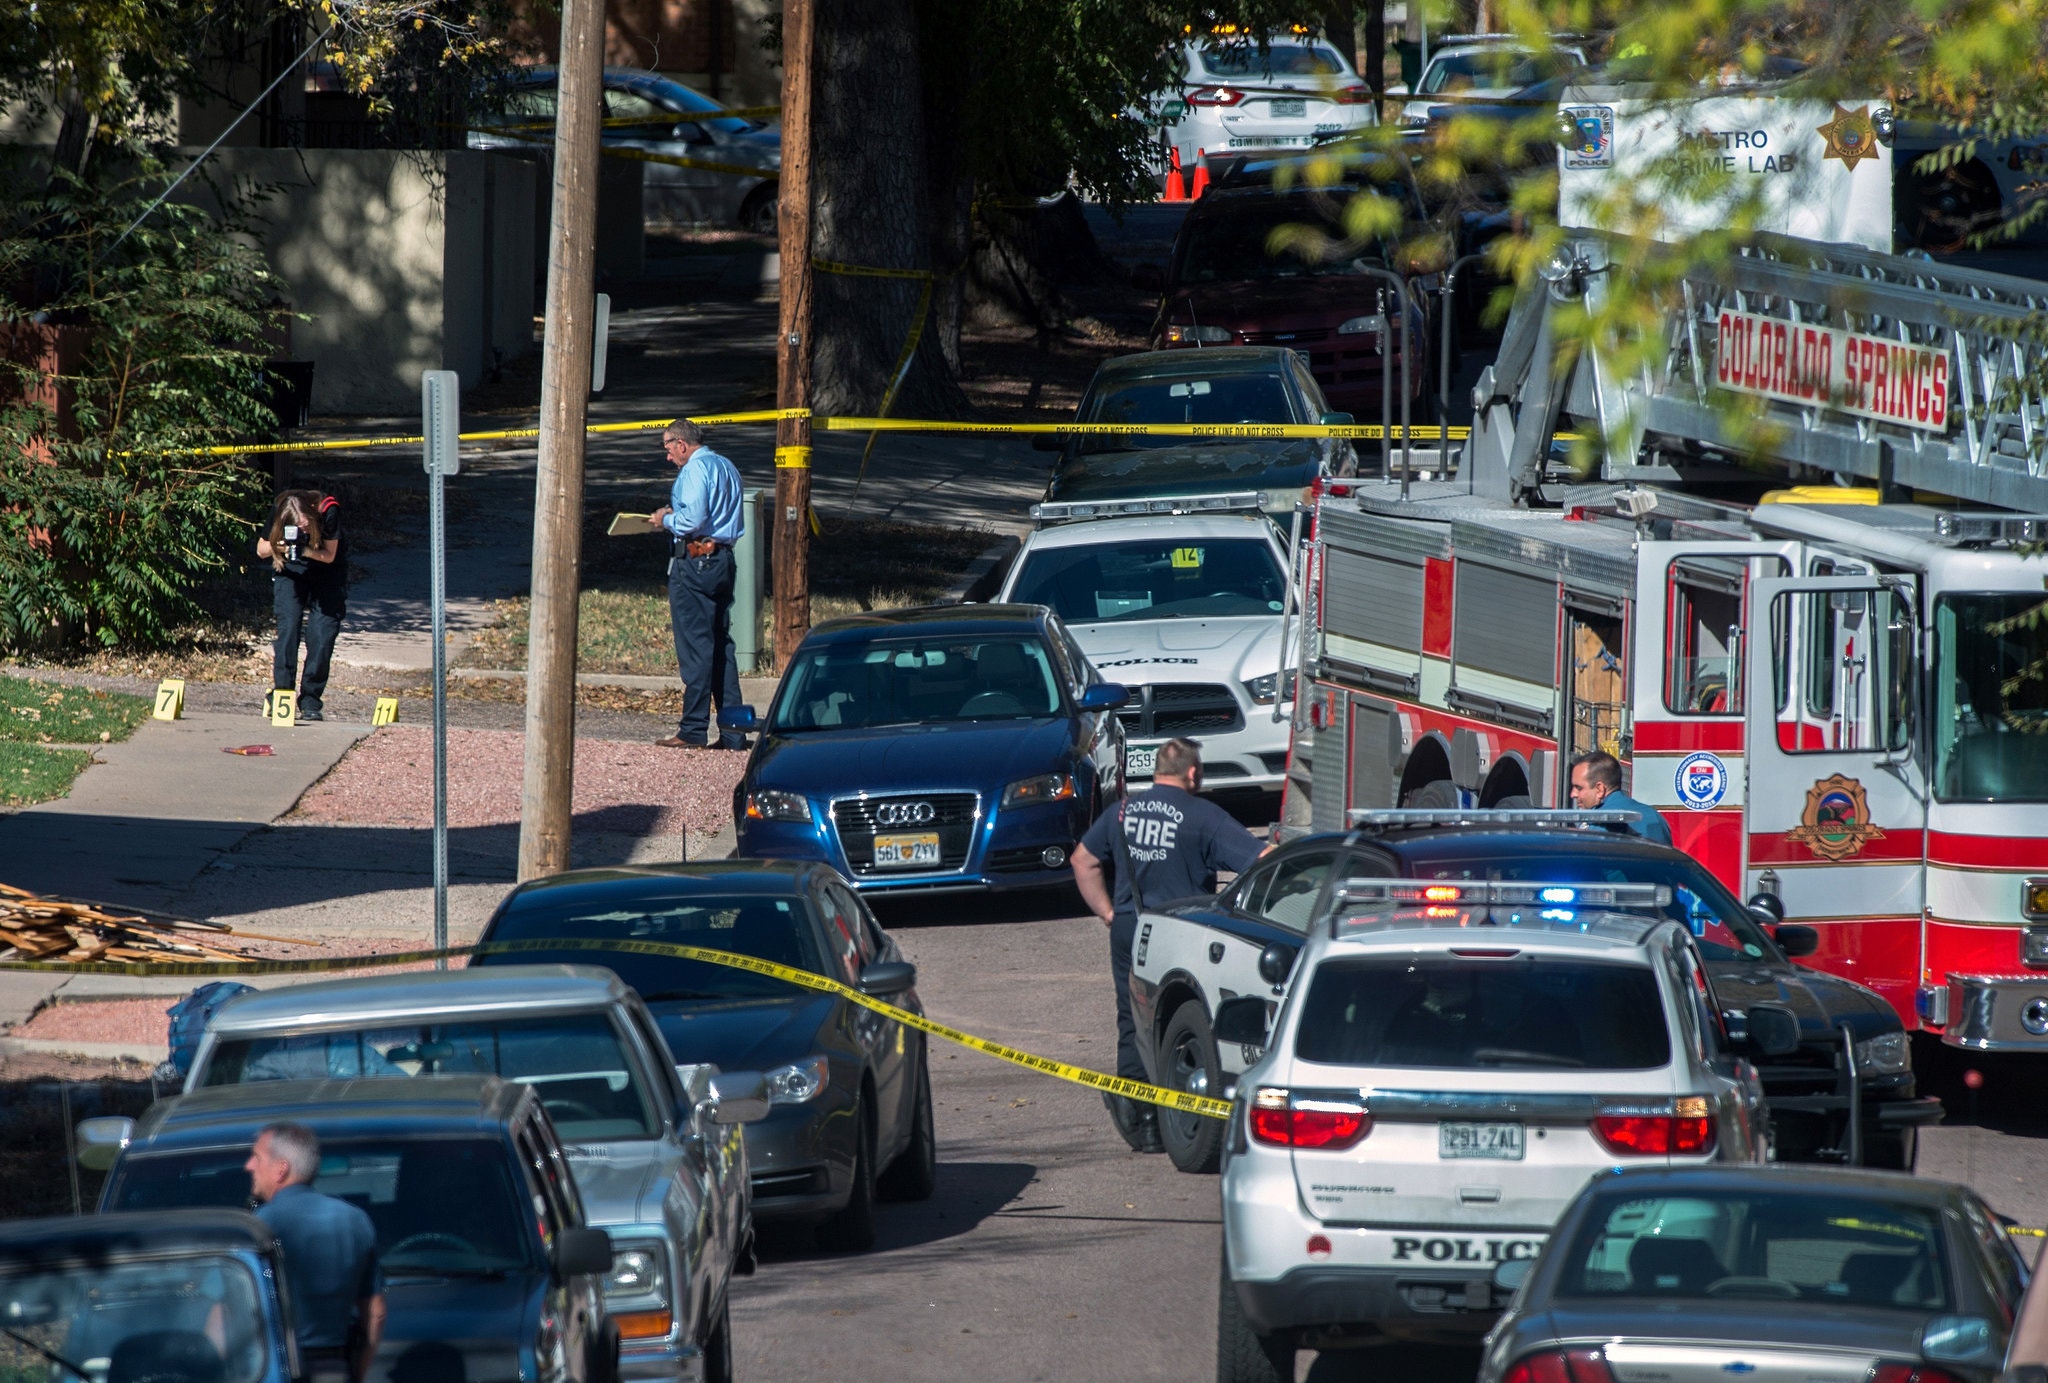 Four Dead In Shootings In Colorado Springs The New York Times